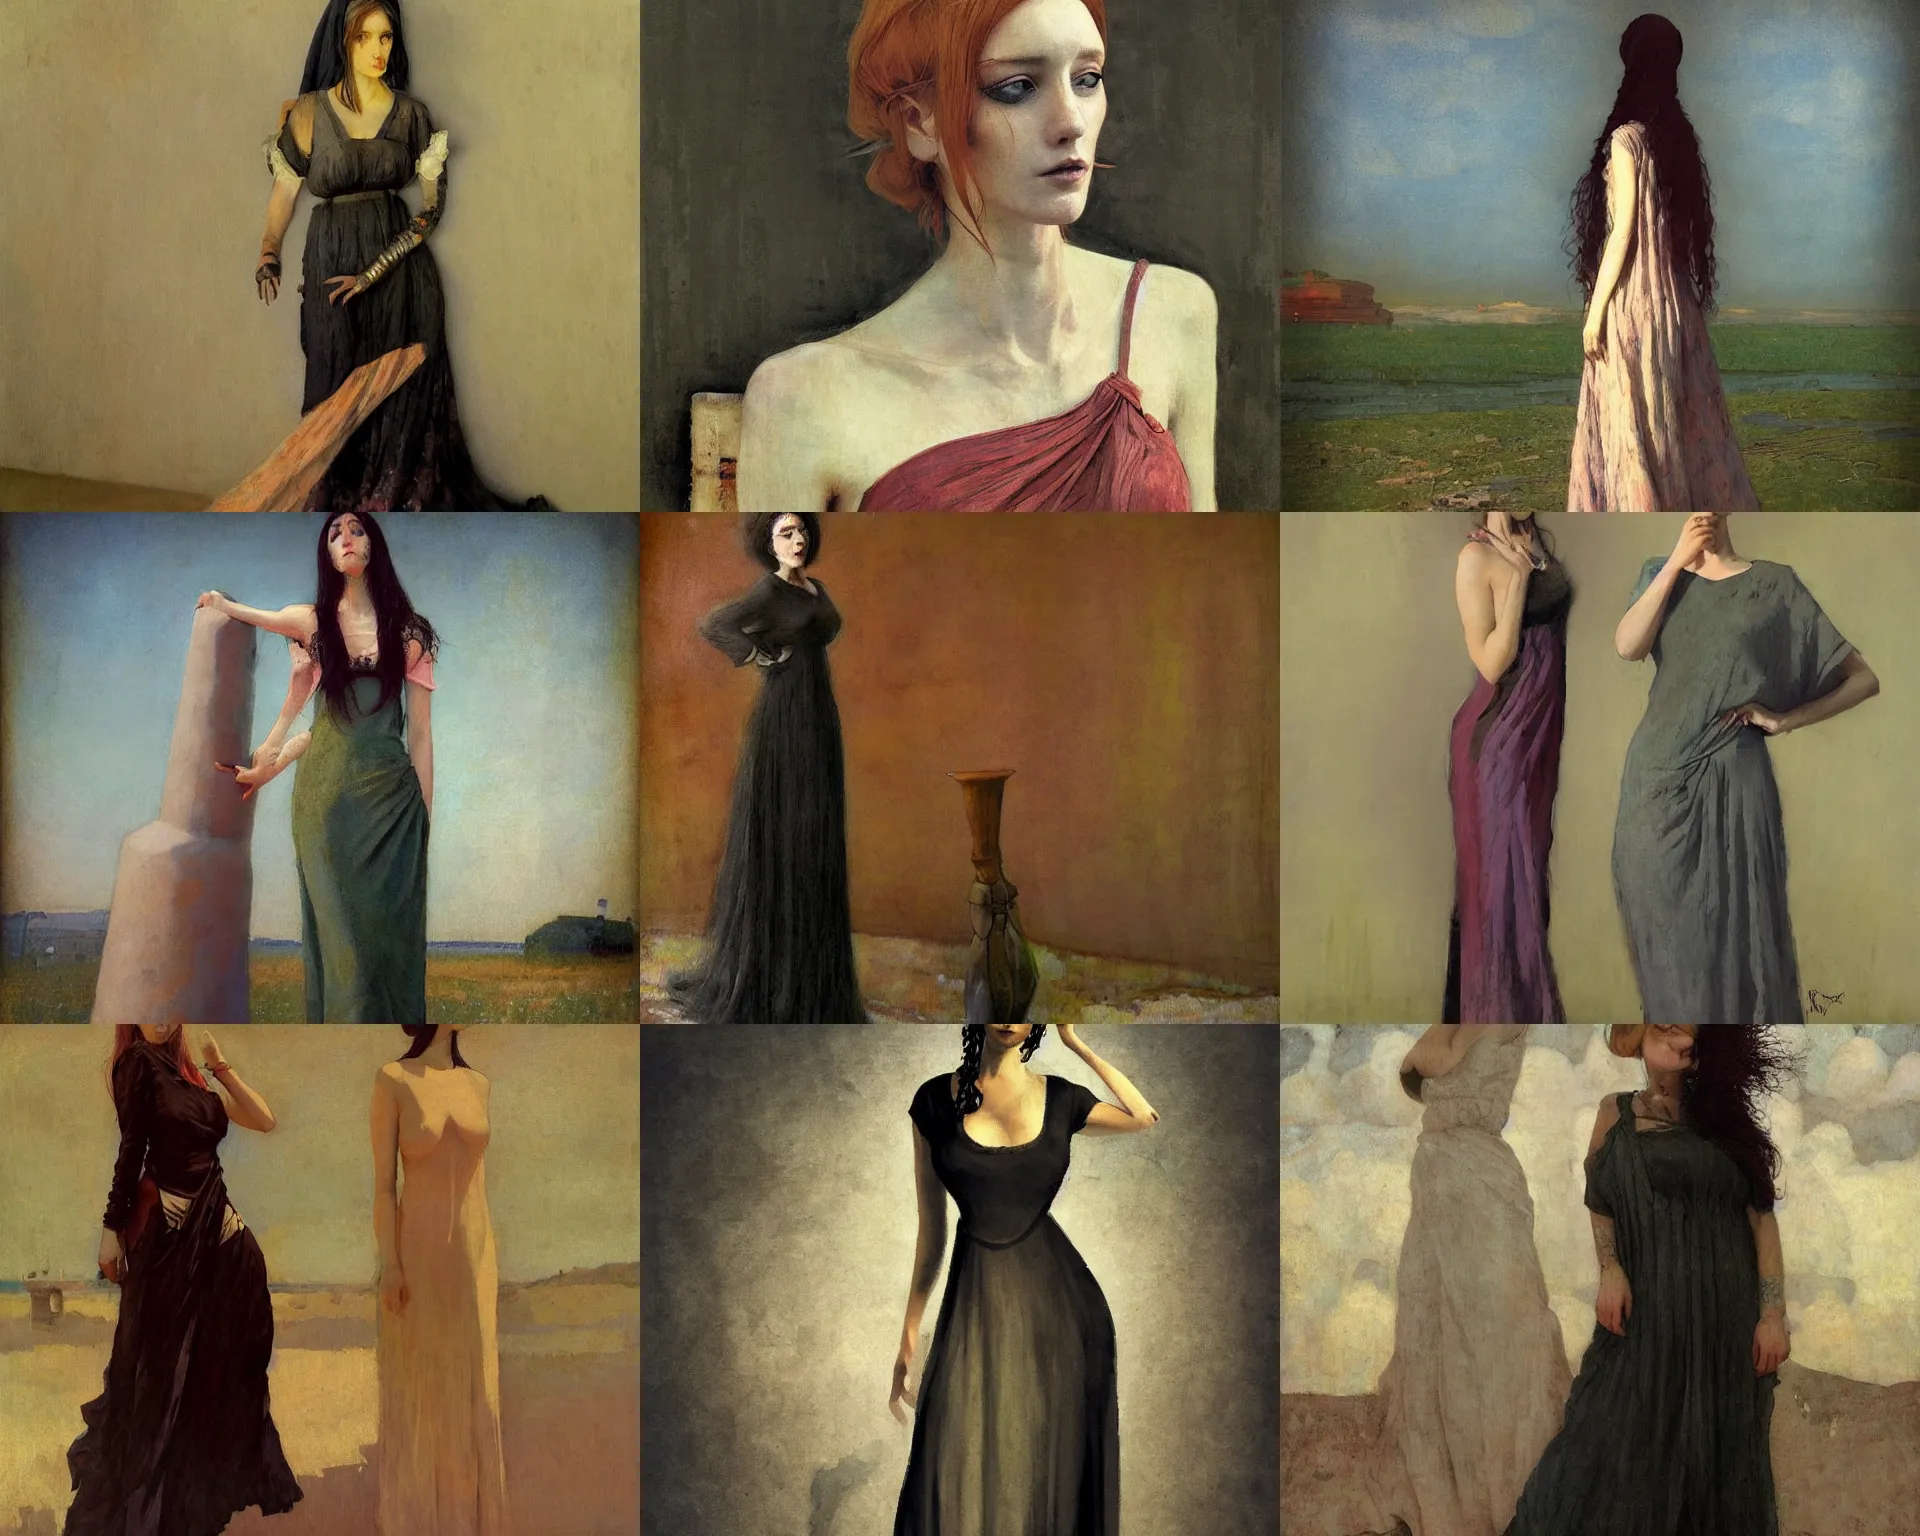 Prompt: woman portrait, female figure in maxi dress, rhads, modernism, low poly, industrial, vapor punk, barocco, ilya repin style and John Bauer style